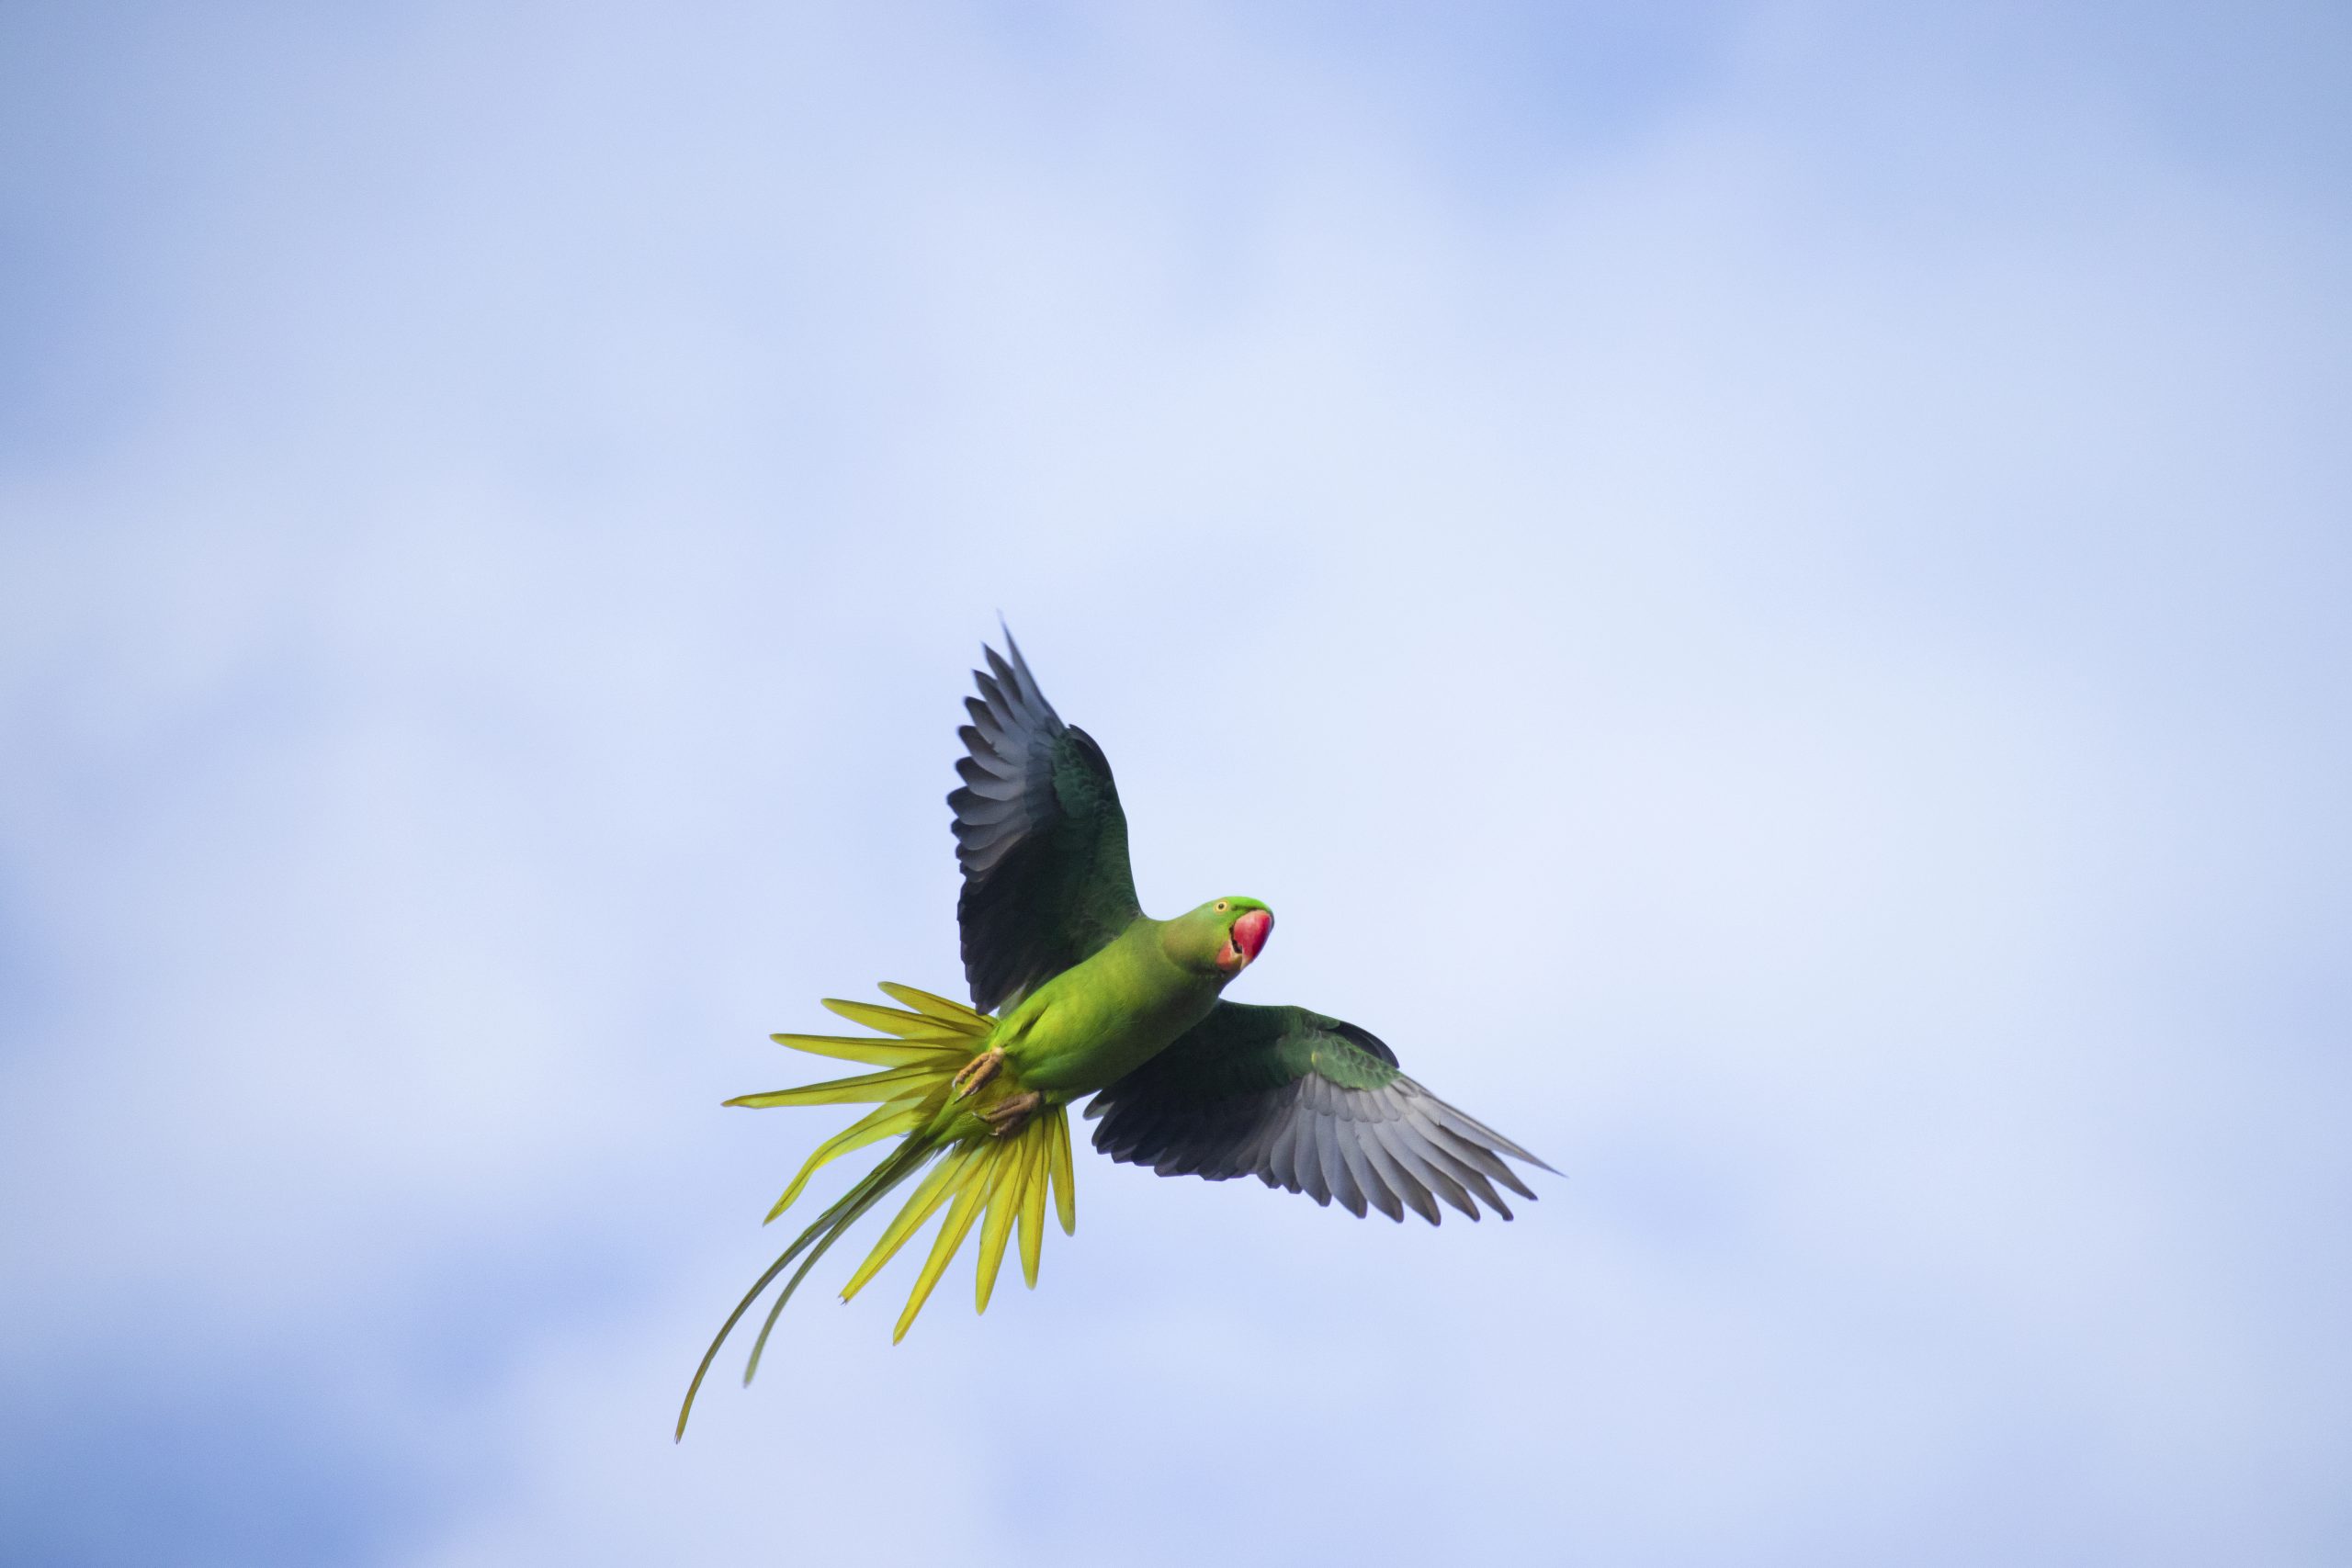 A flying parrot